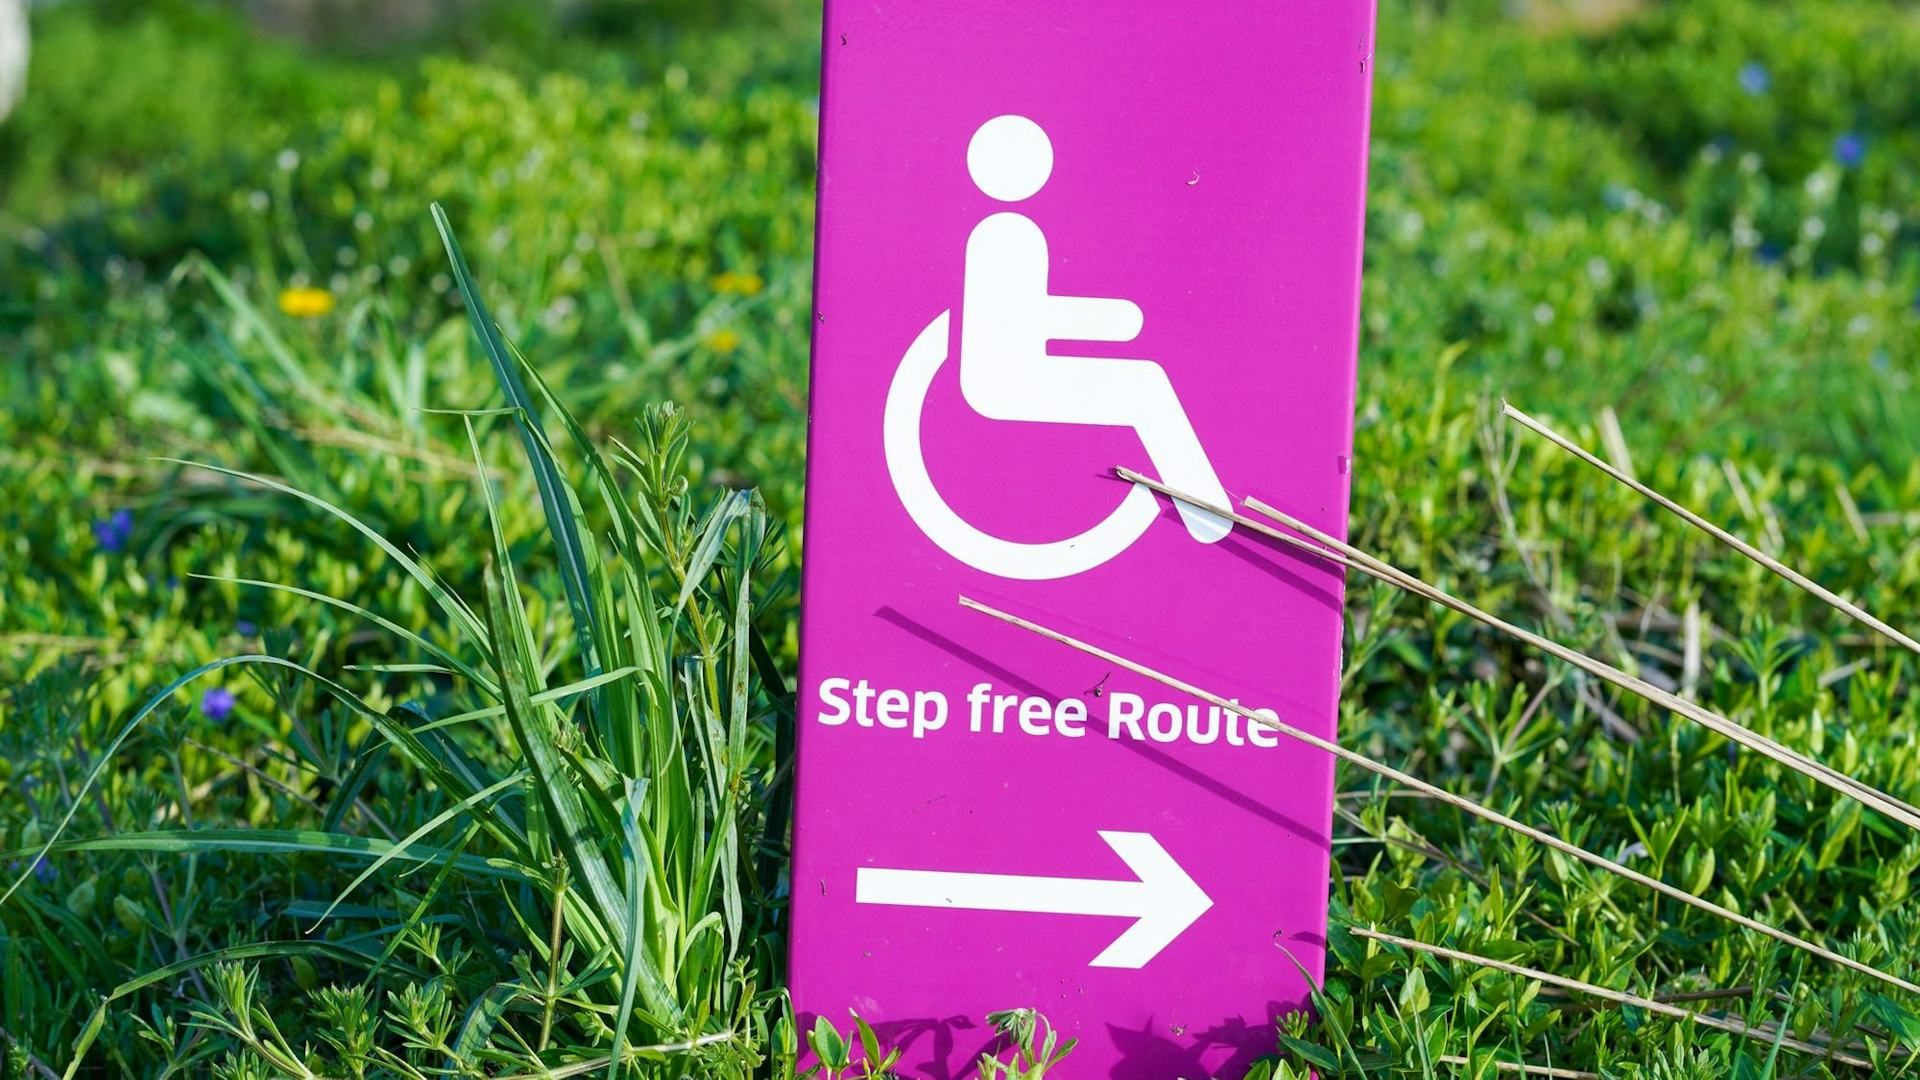 accessiblity poster saying step free route